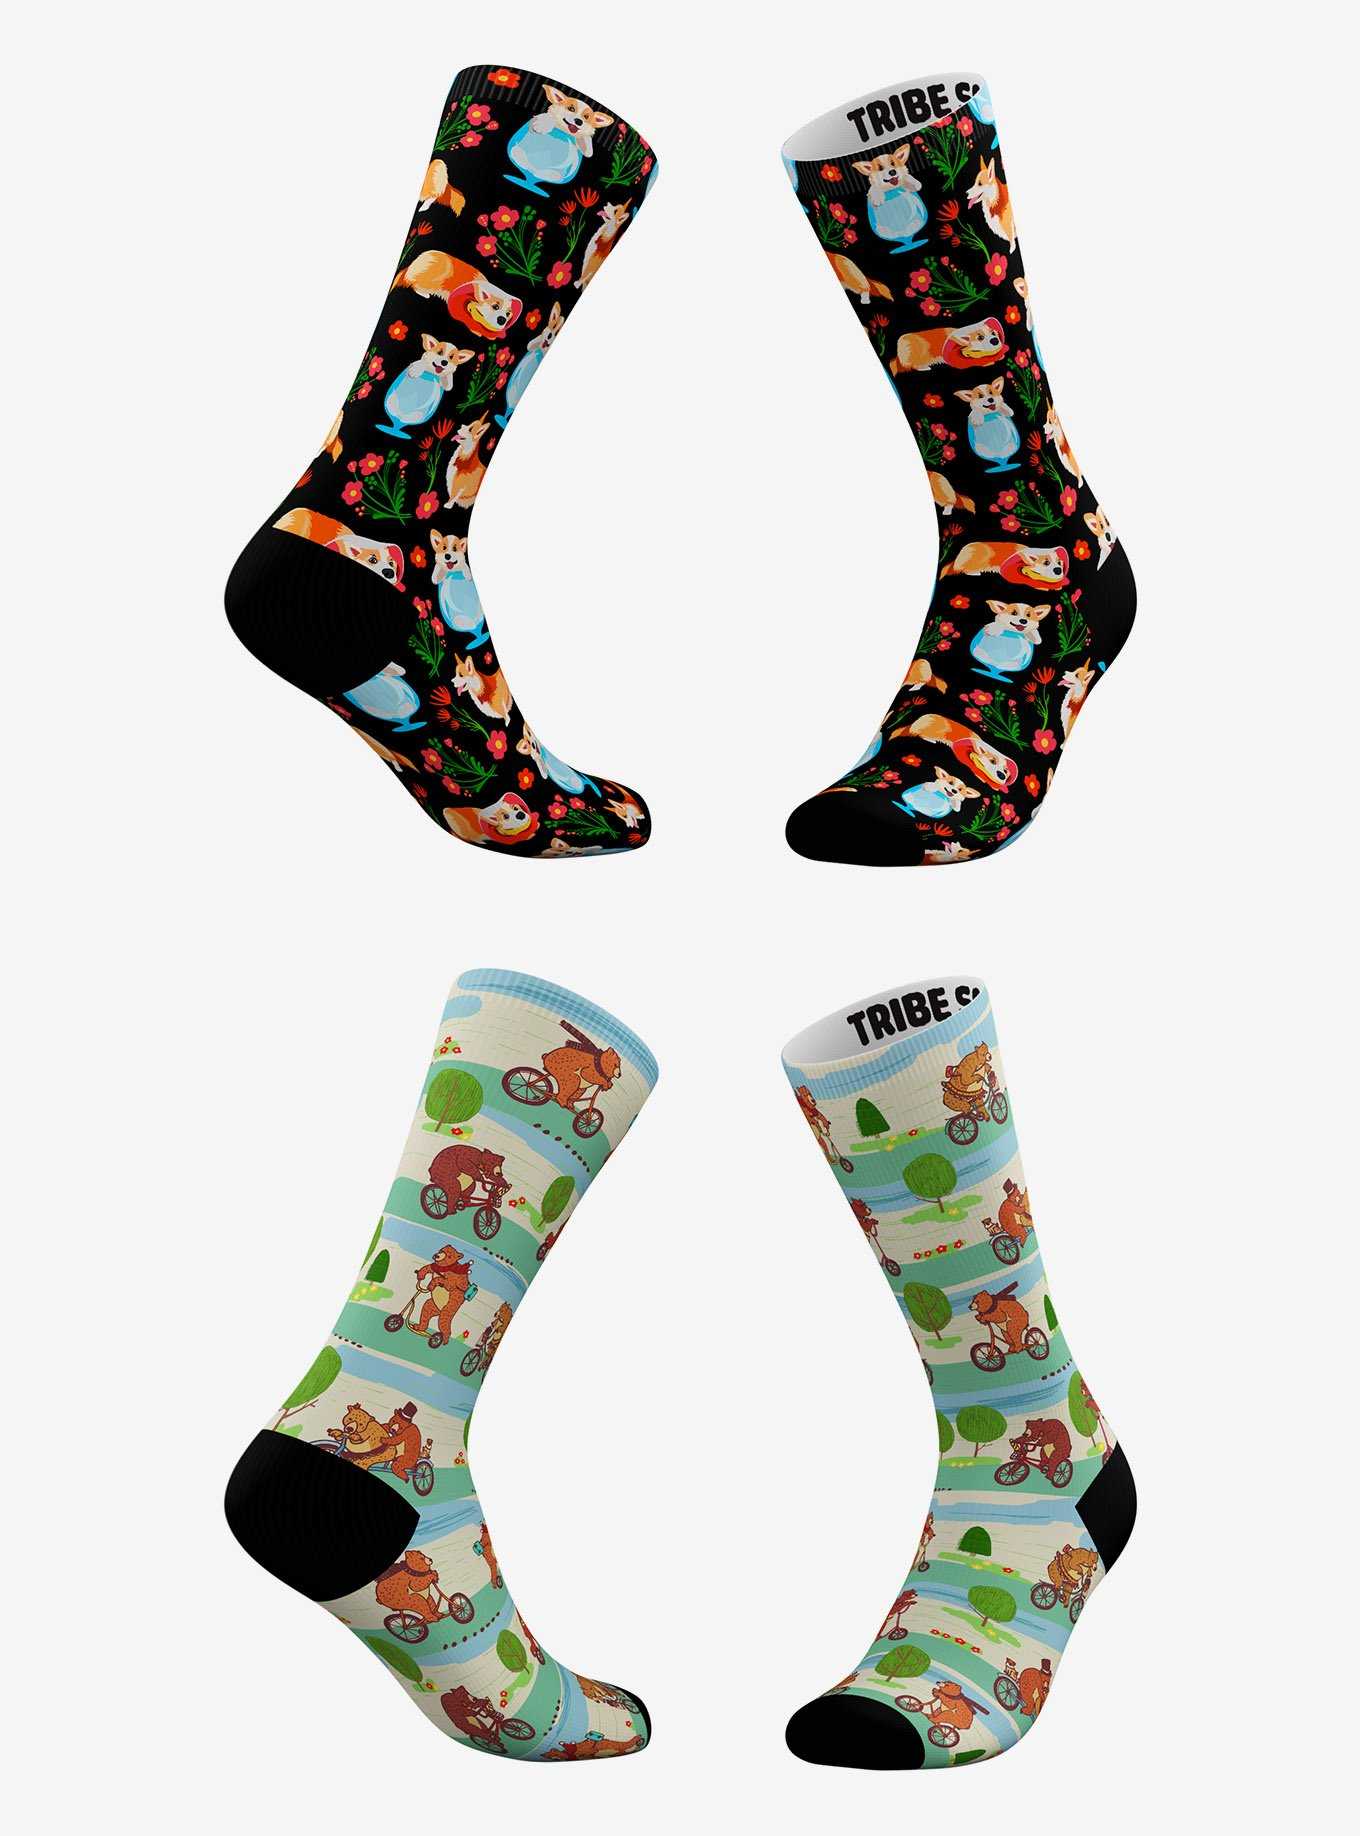 Cup Of Corgi And Teddy-Ous Commute Socks 2 Pair, , hi-res